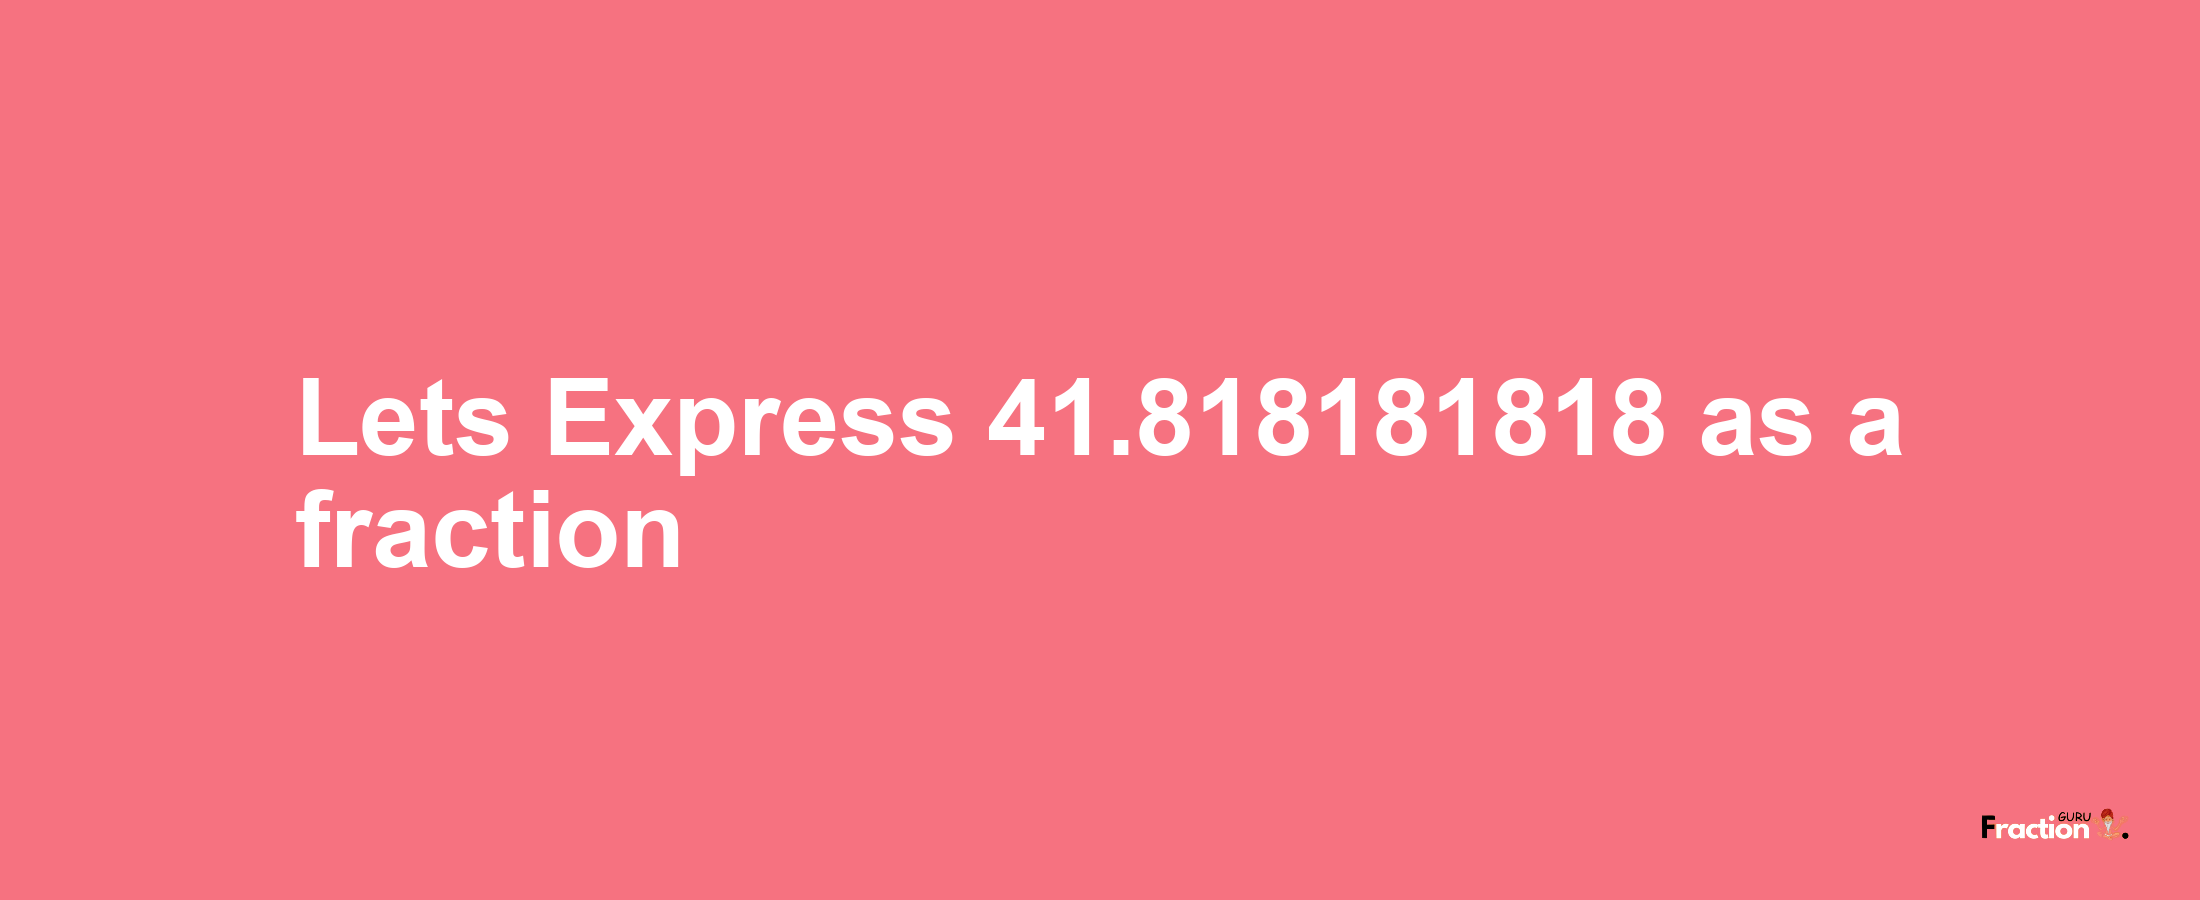 Lets Express 41.818181818 as afraction